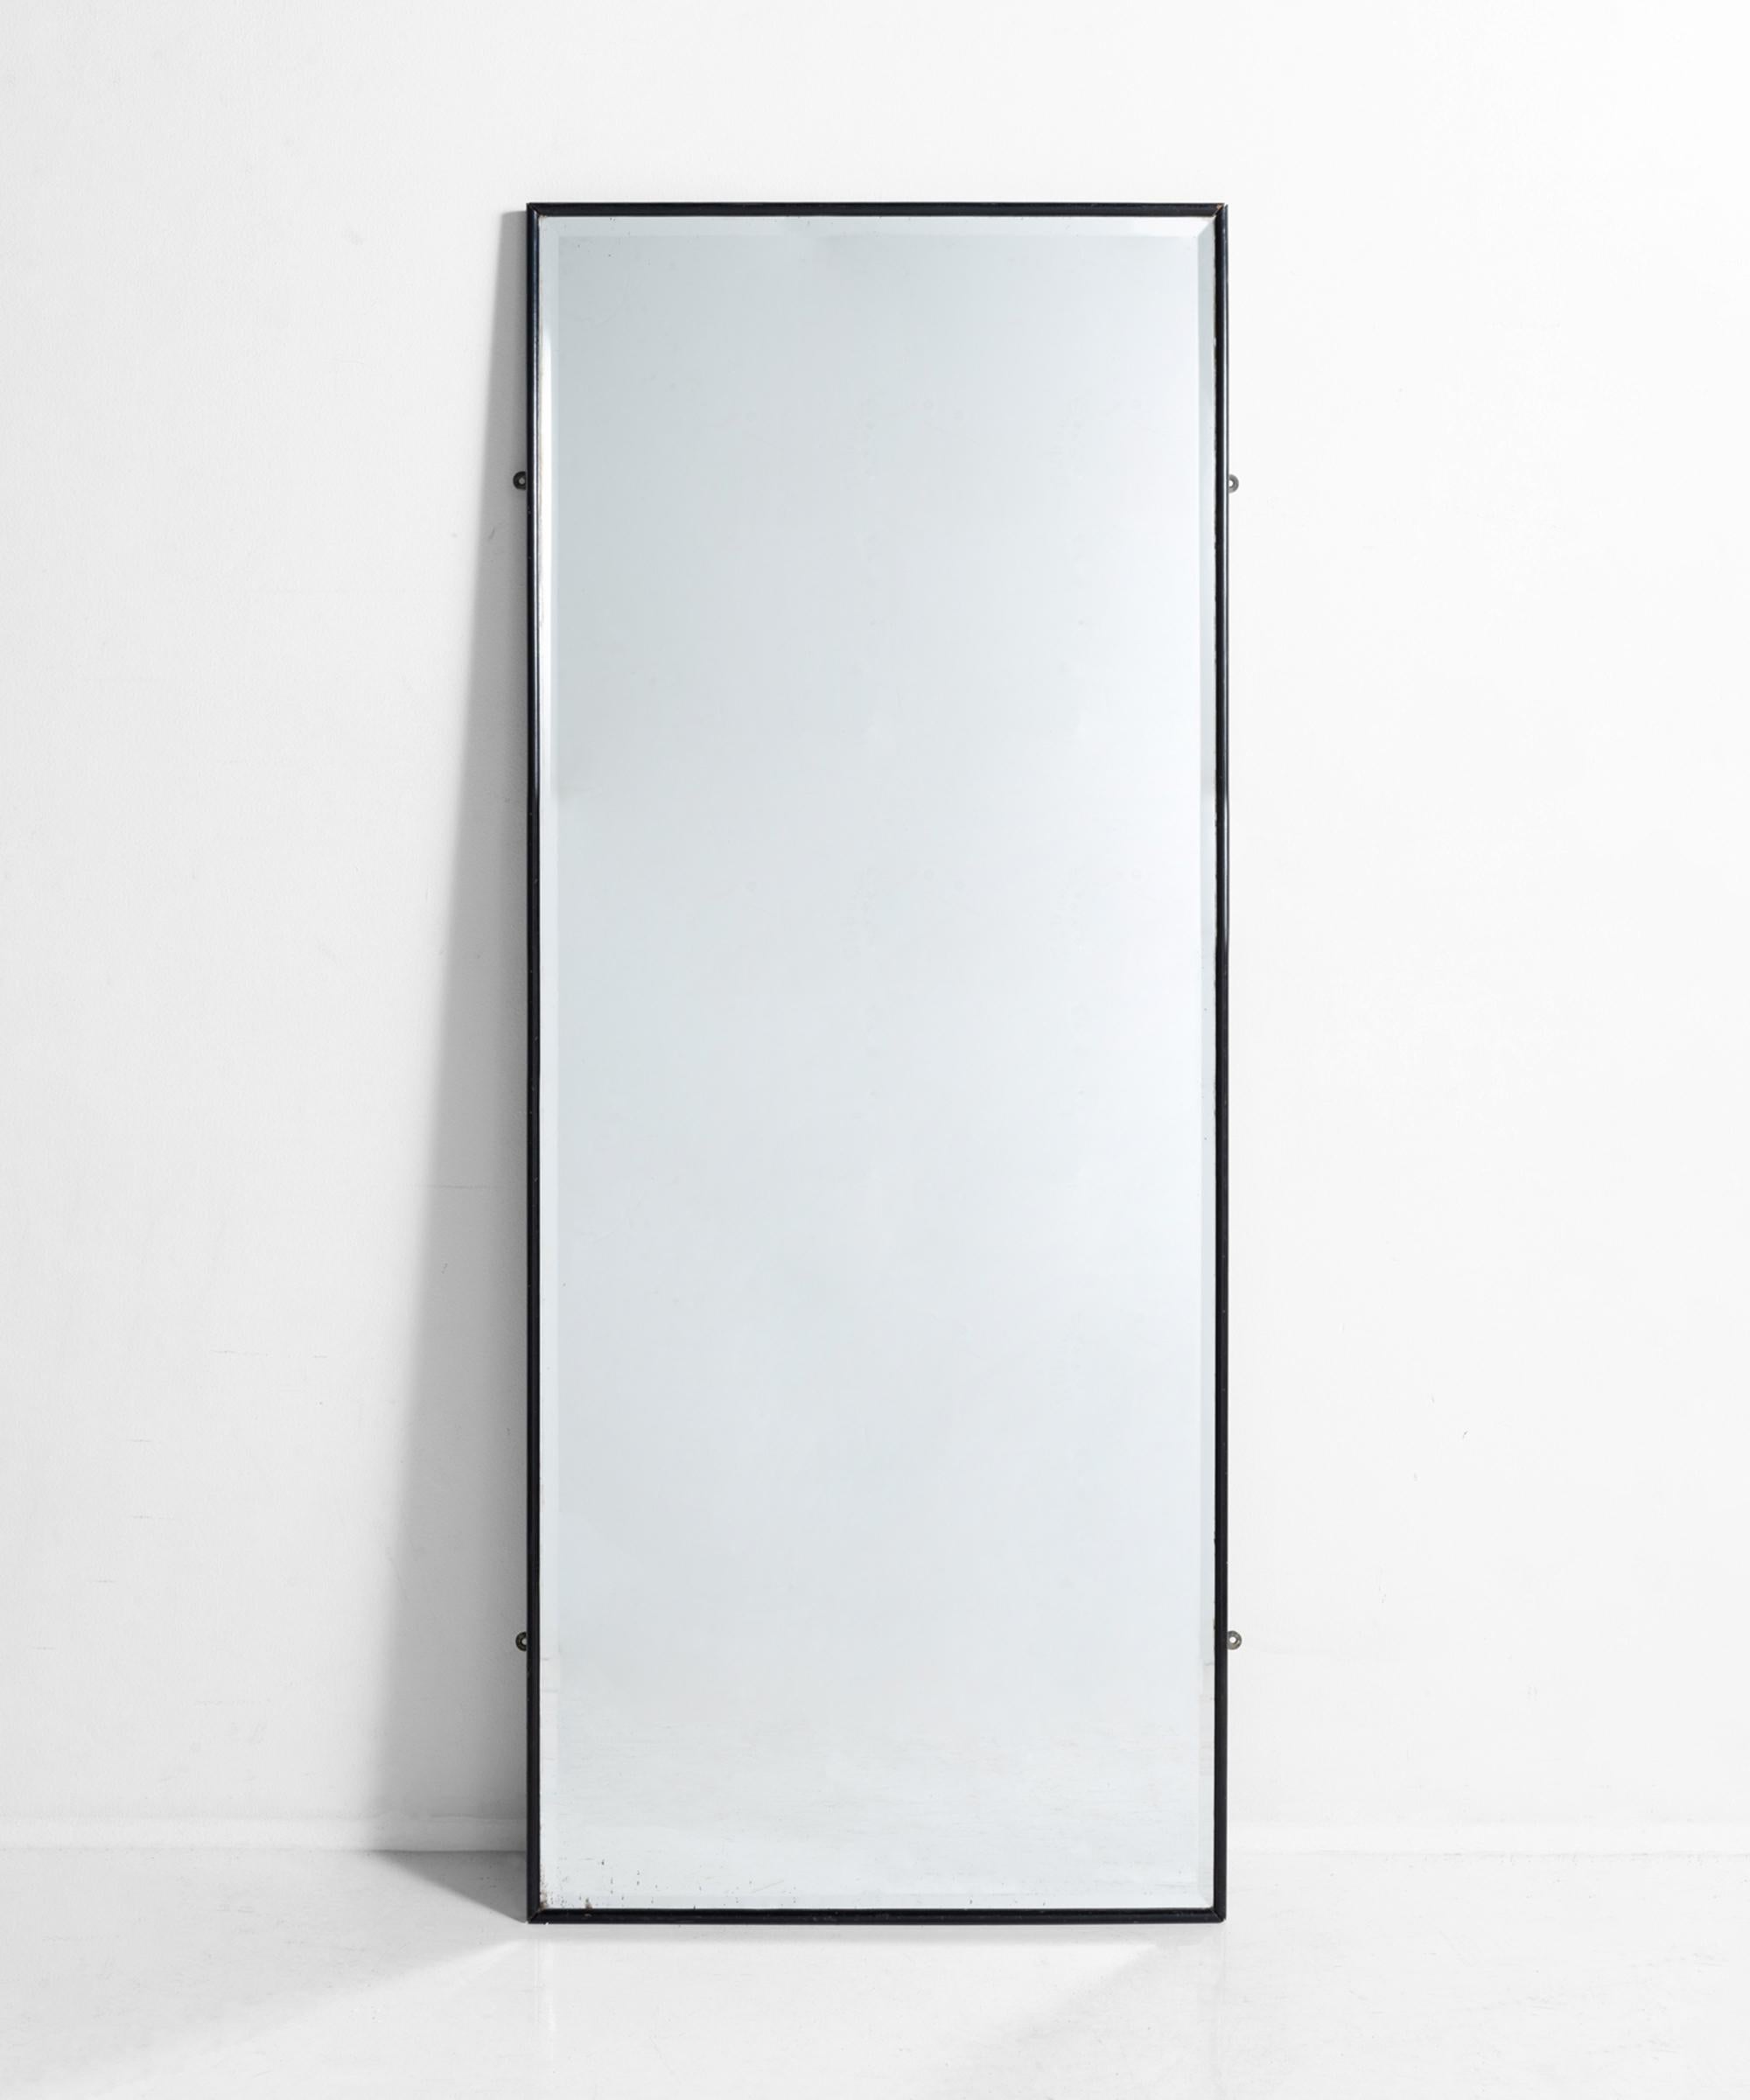 Ebonized outfitters wall mirror, England, circa 1880.

Originally used in a men’s clothing shop in Leicestershire, with original beveled edge mirror plate.

Measures: 24.75” W x .75” D x 60.5” H.